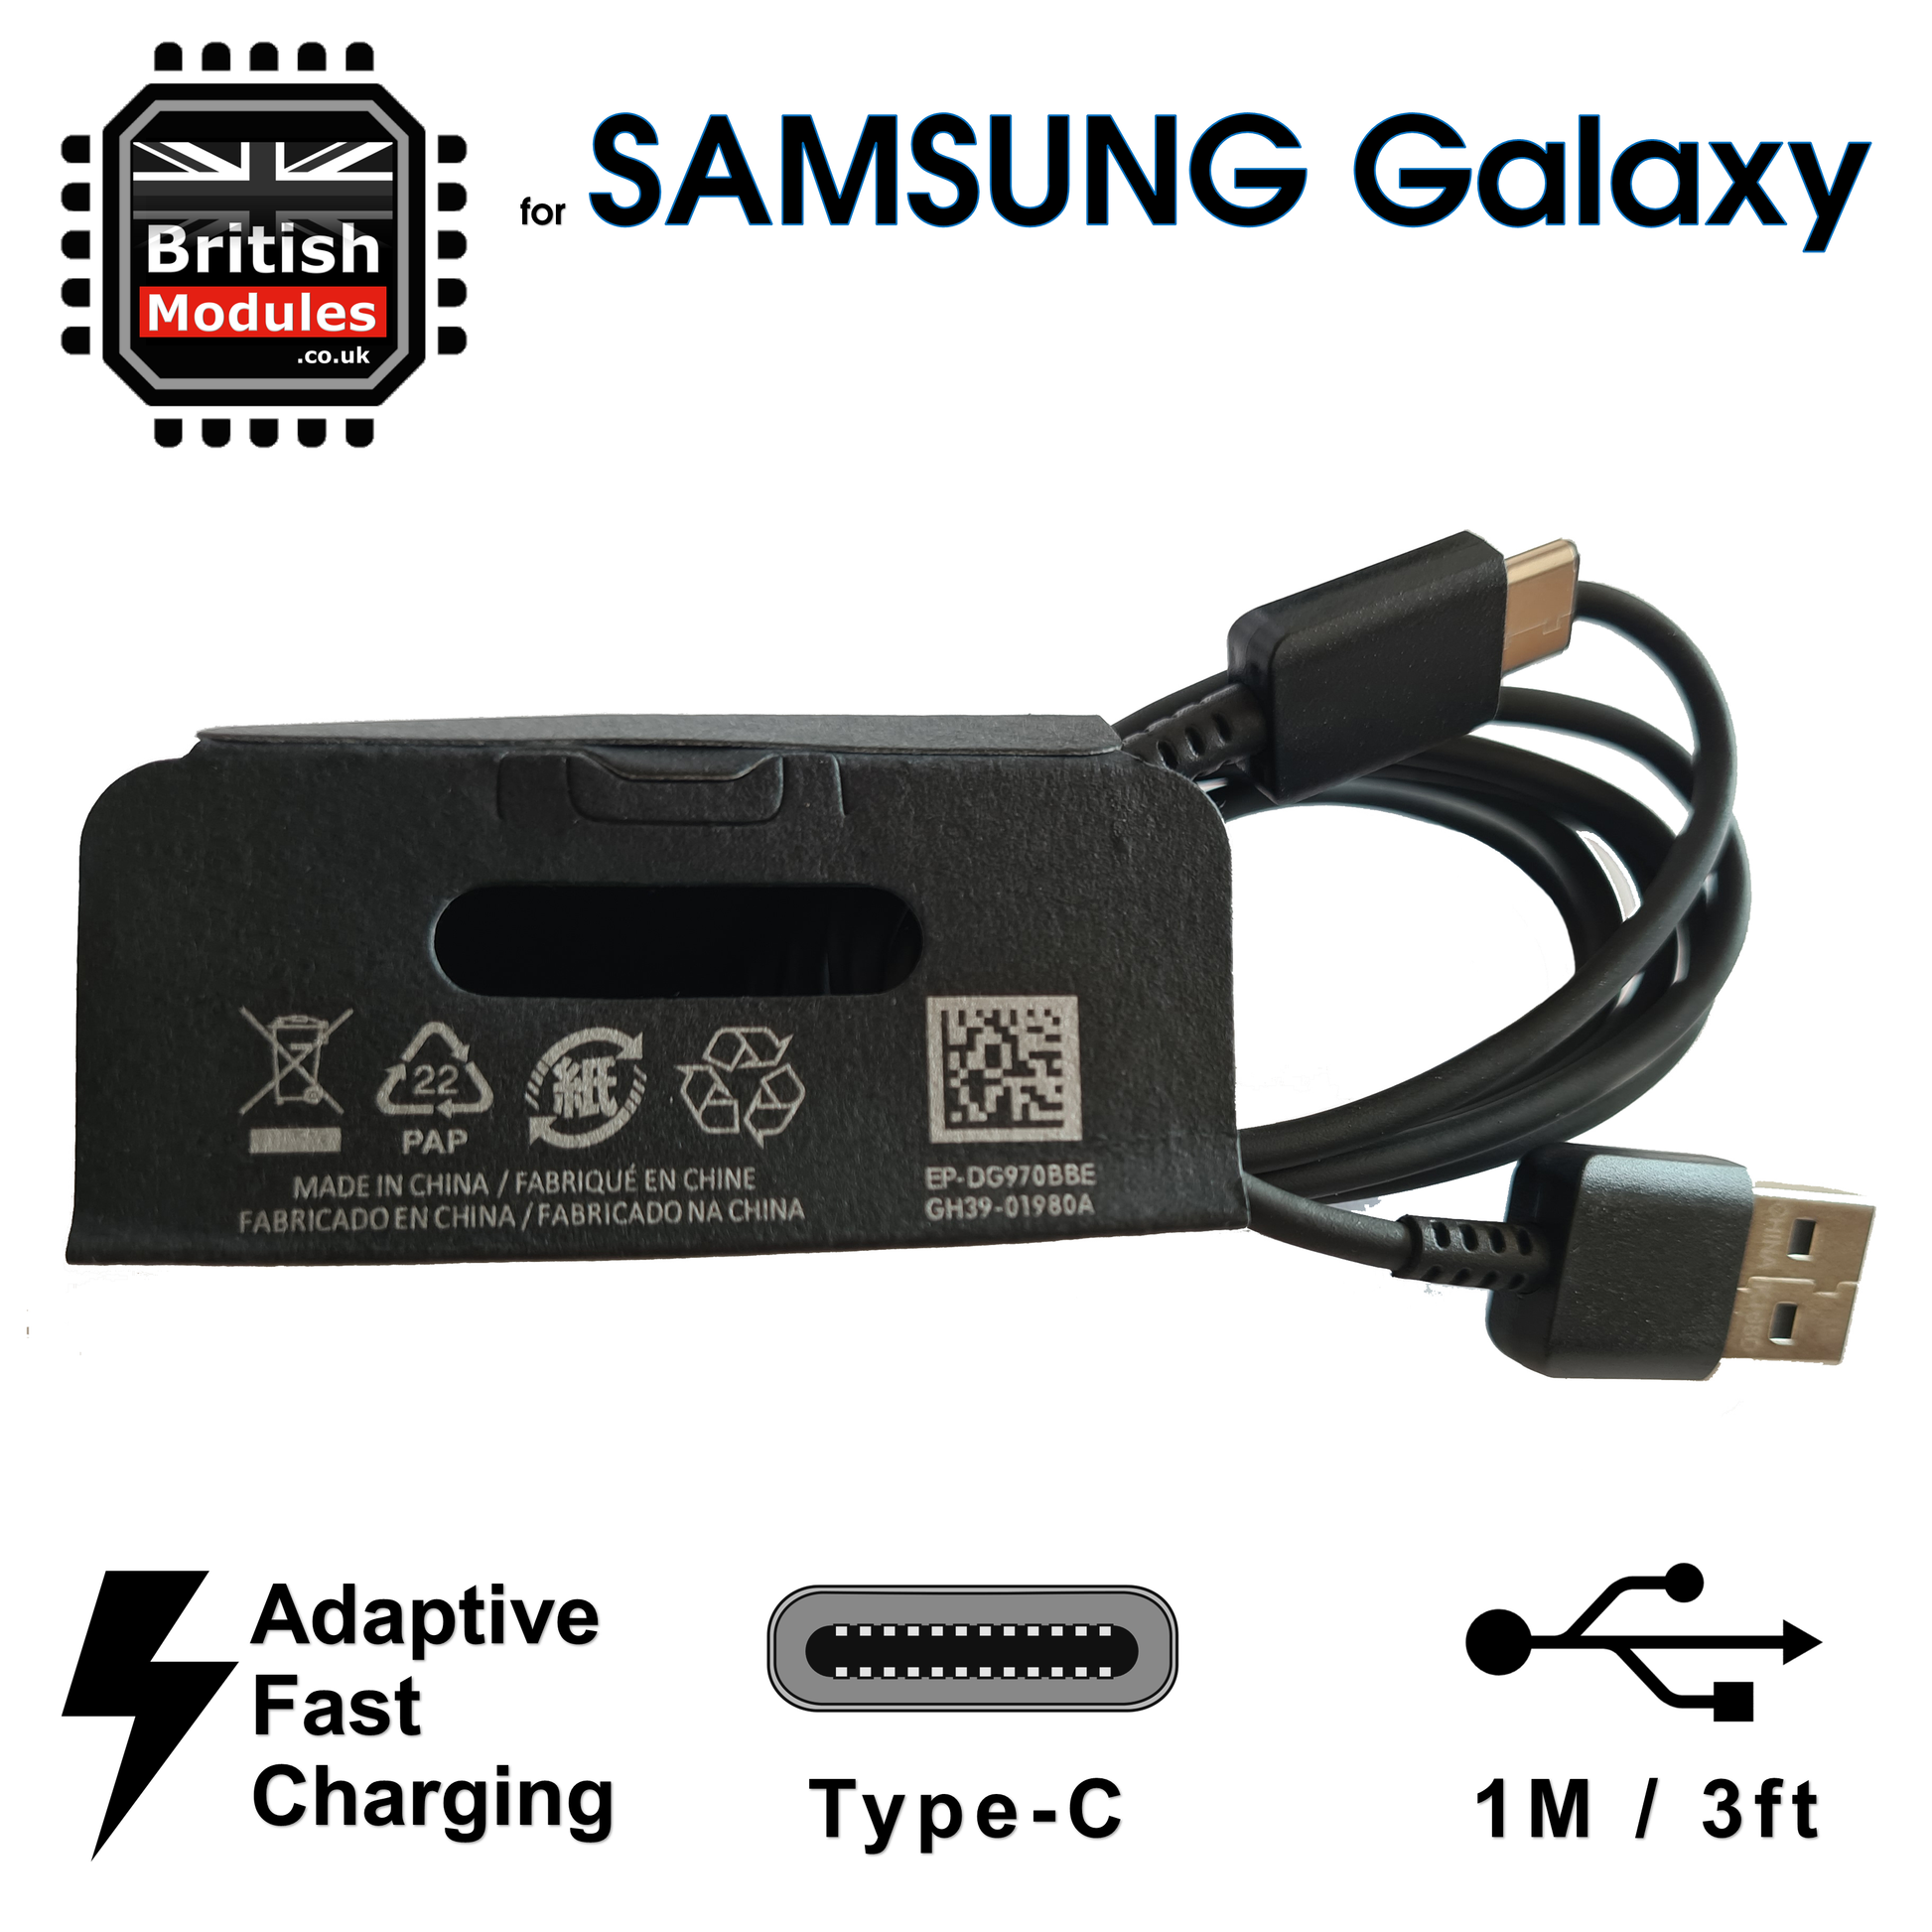 Official Samsung Galaxy USB-C A30 Fast Charging Cable - 1.2m - Black